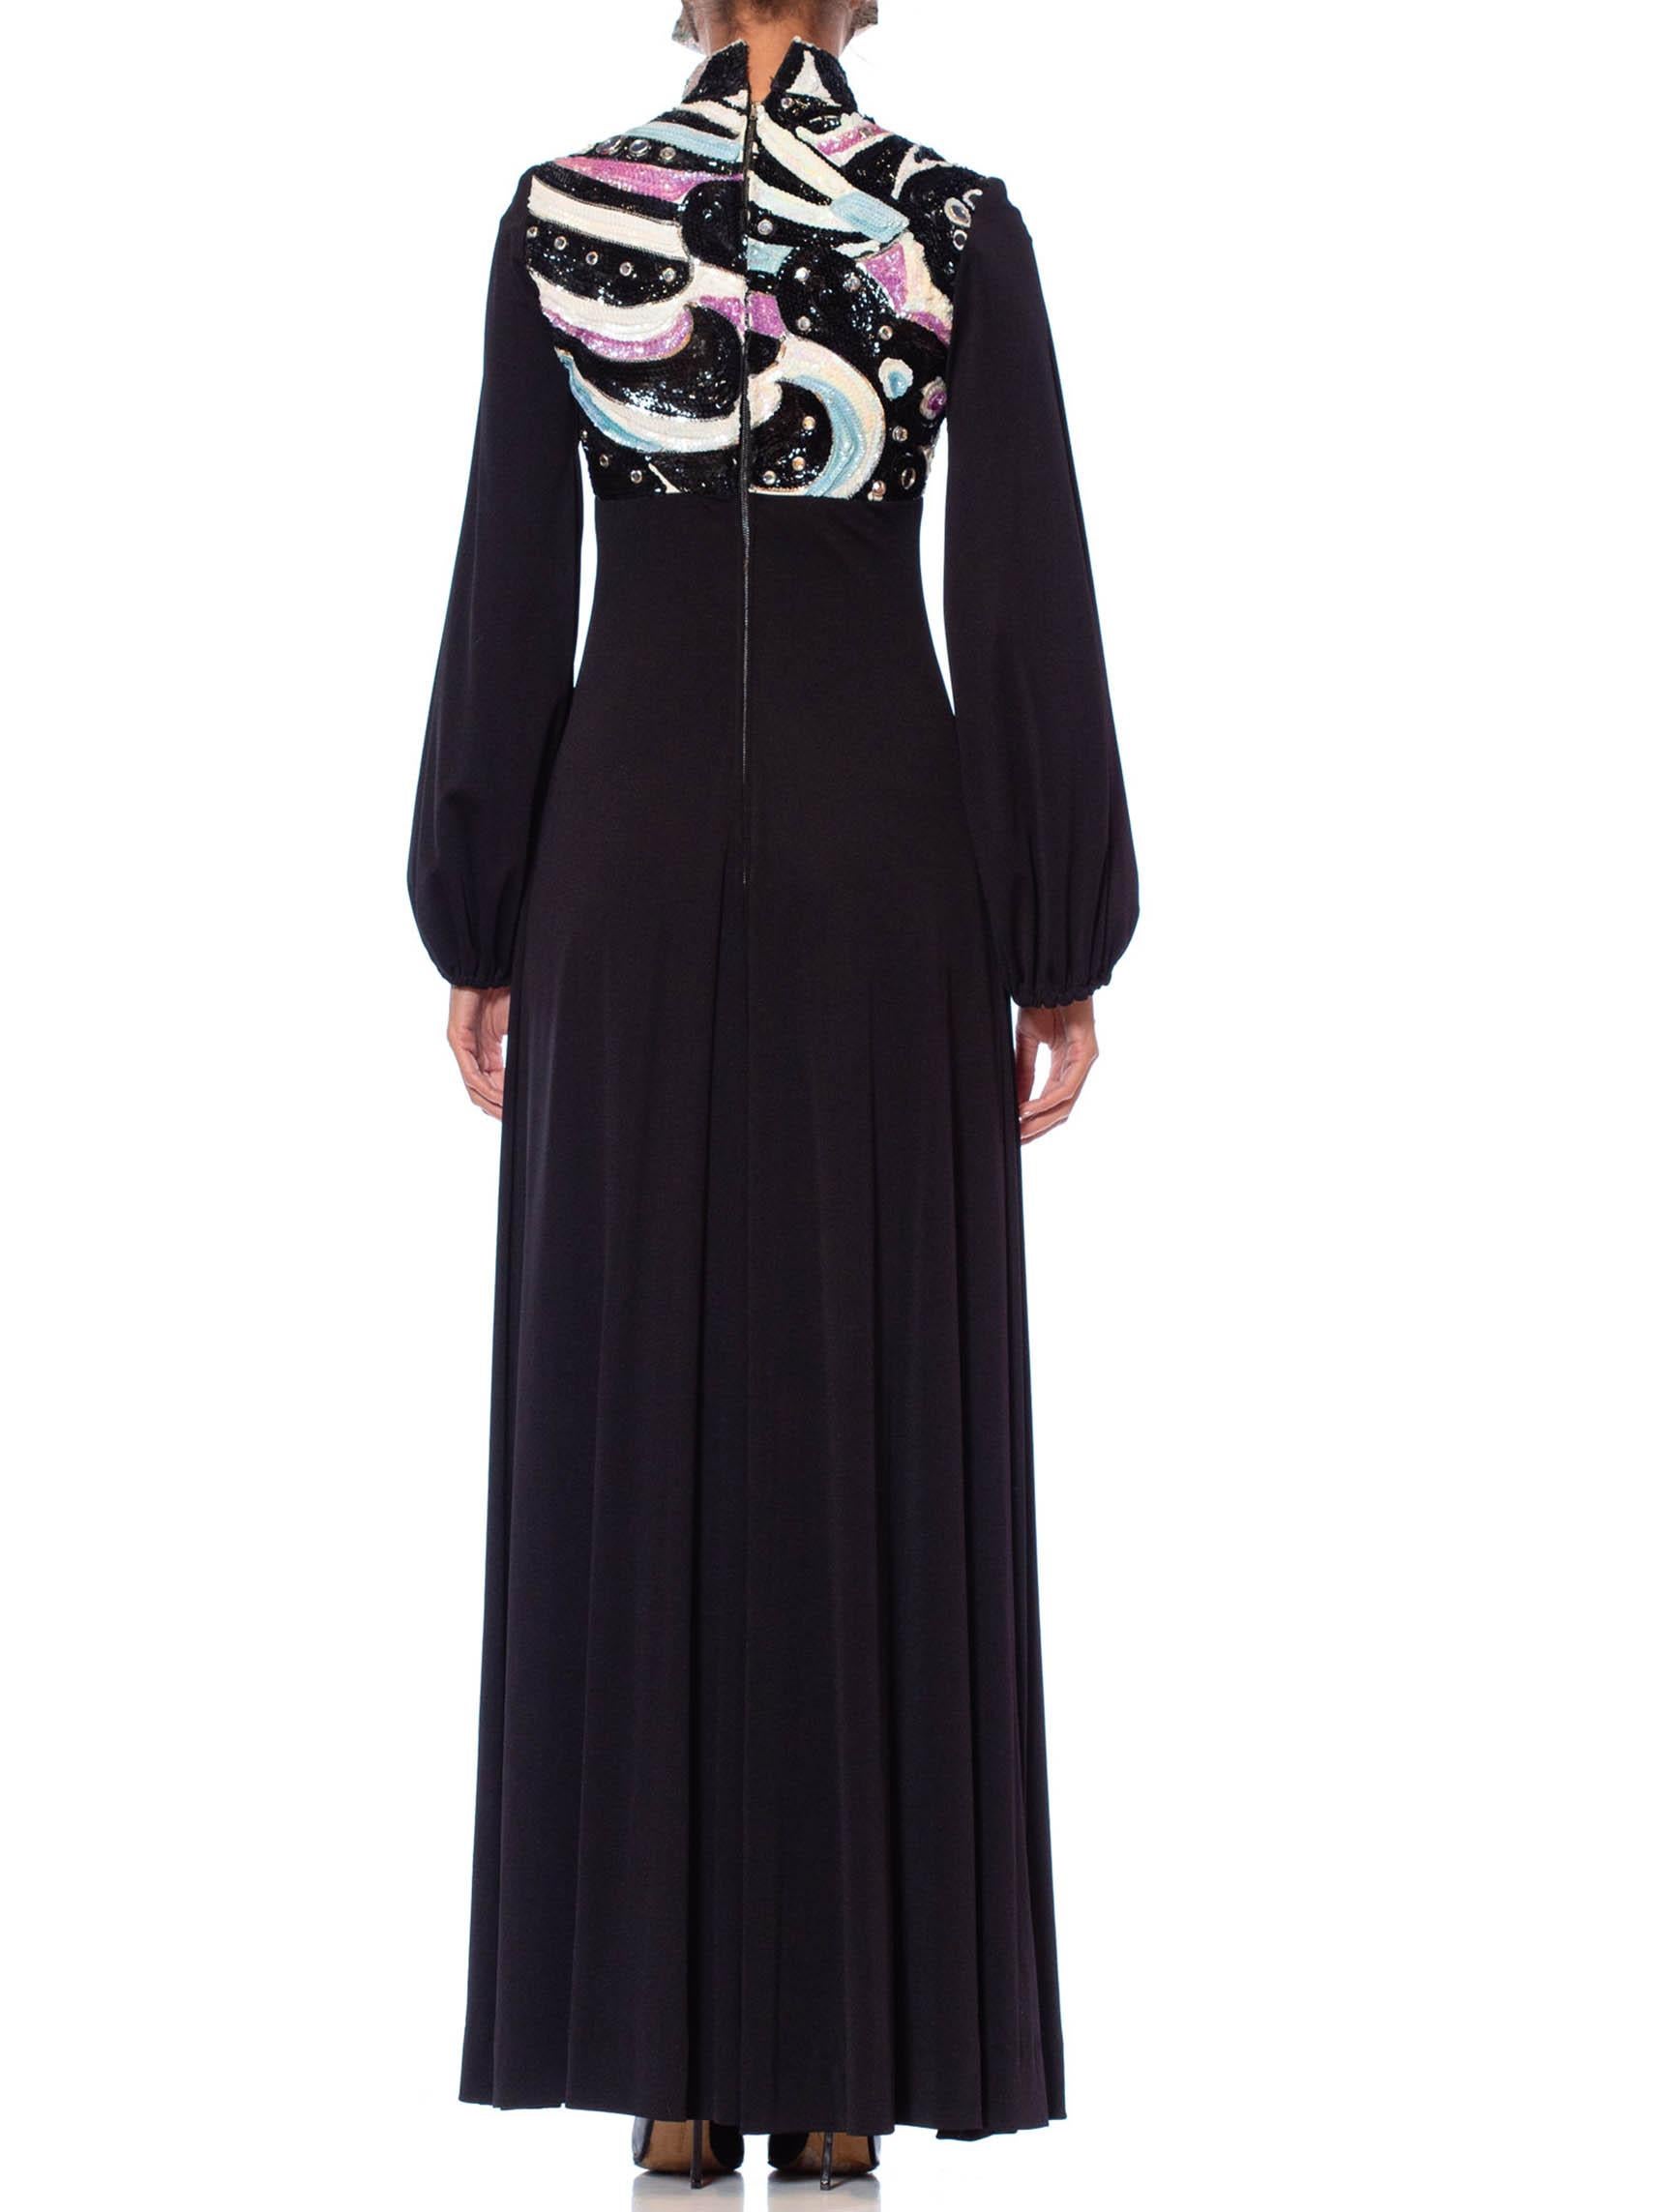 1970S Black Polyester Jersey Psycadellic Beaded Gown Reportedly From The Cher S 1